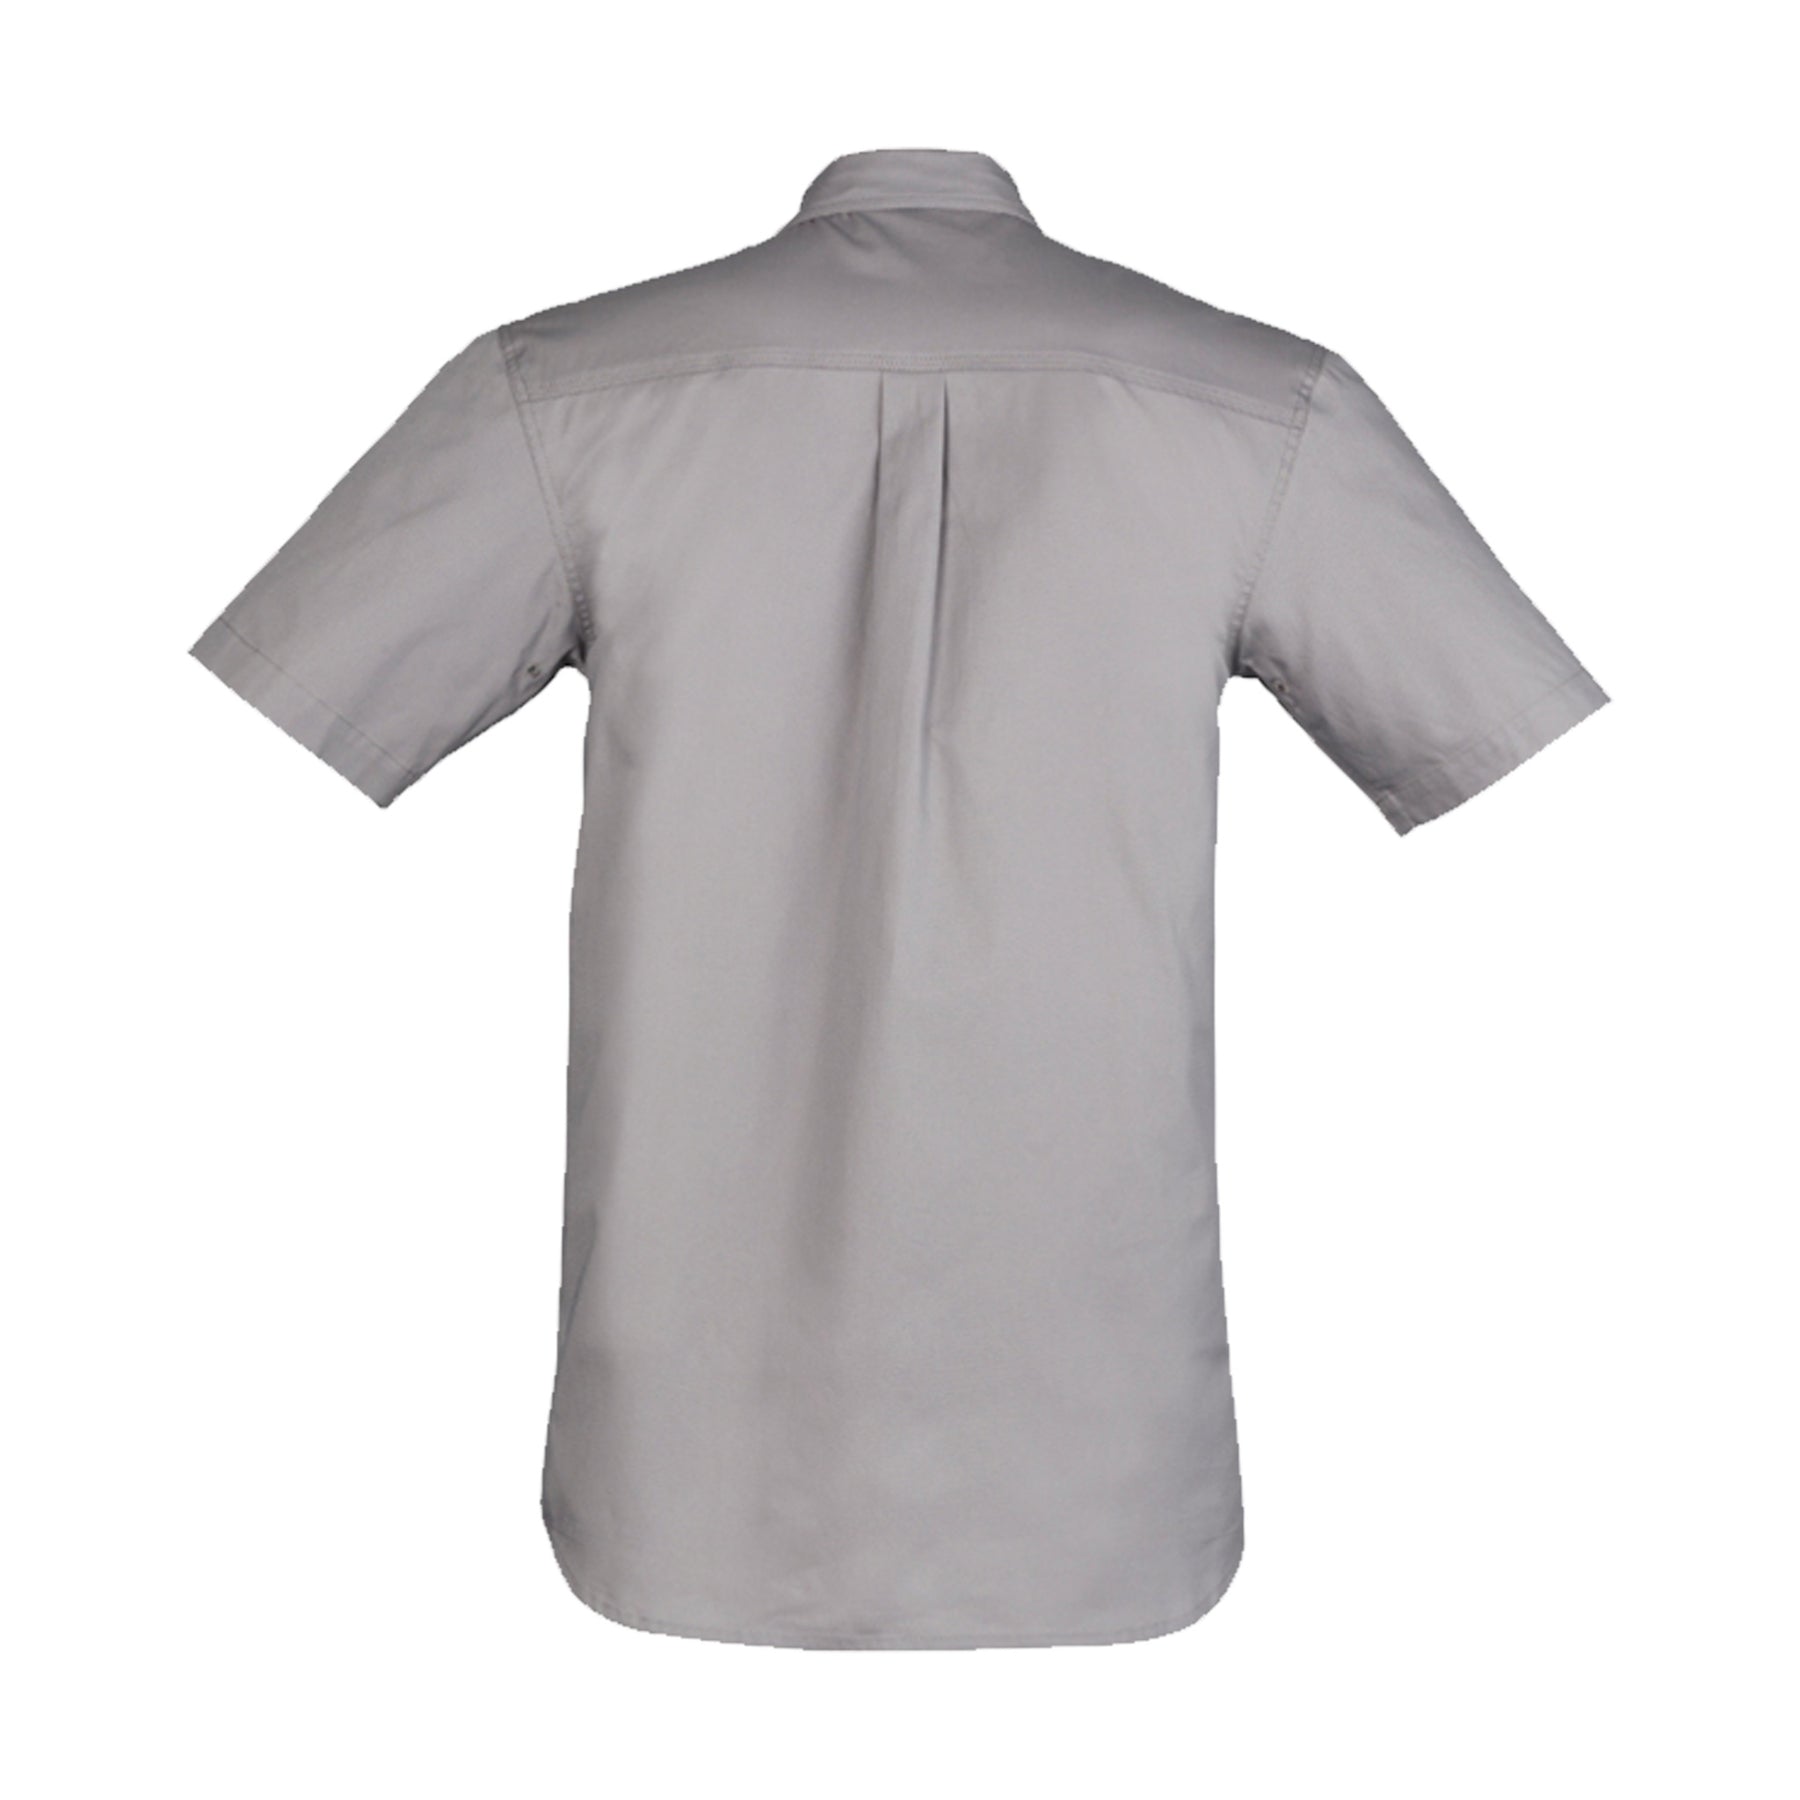 back of light weight short sleeve tradie shirt in grey